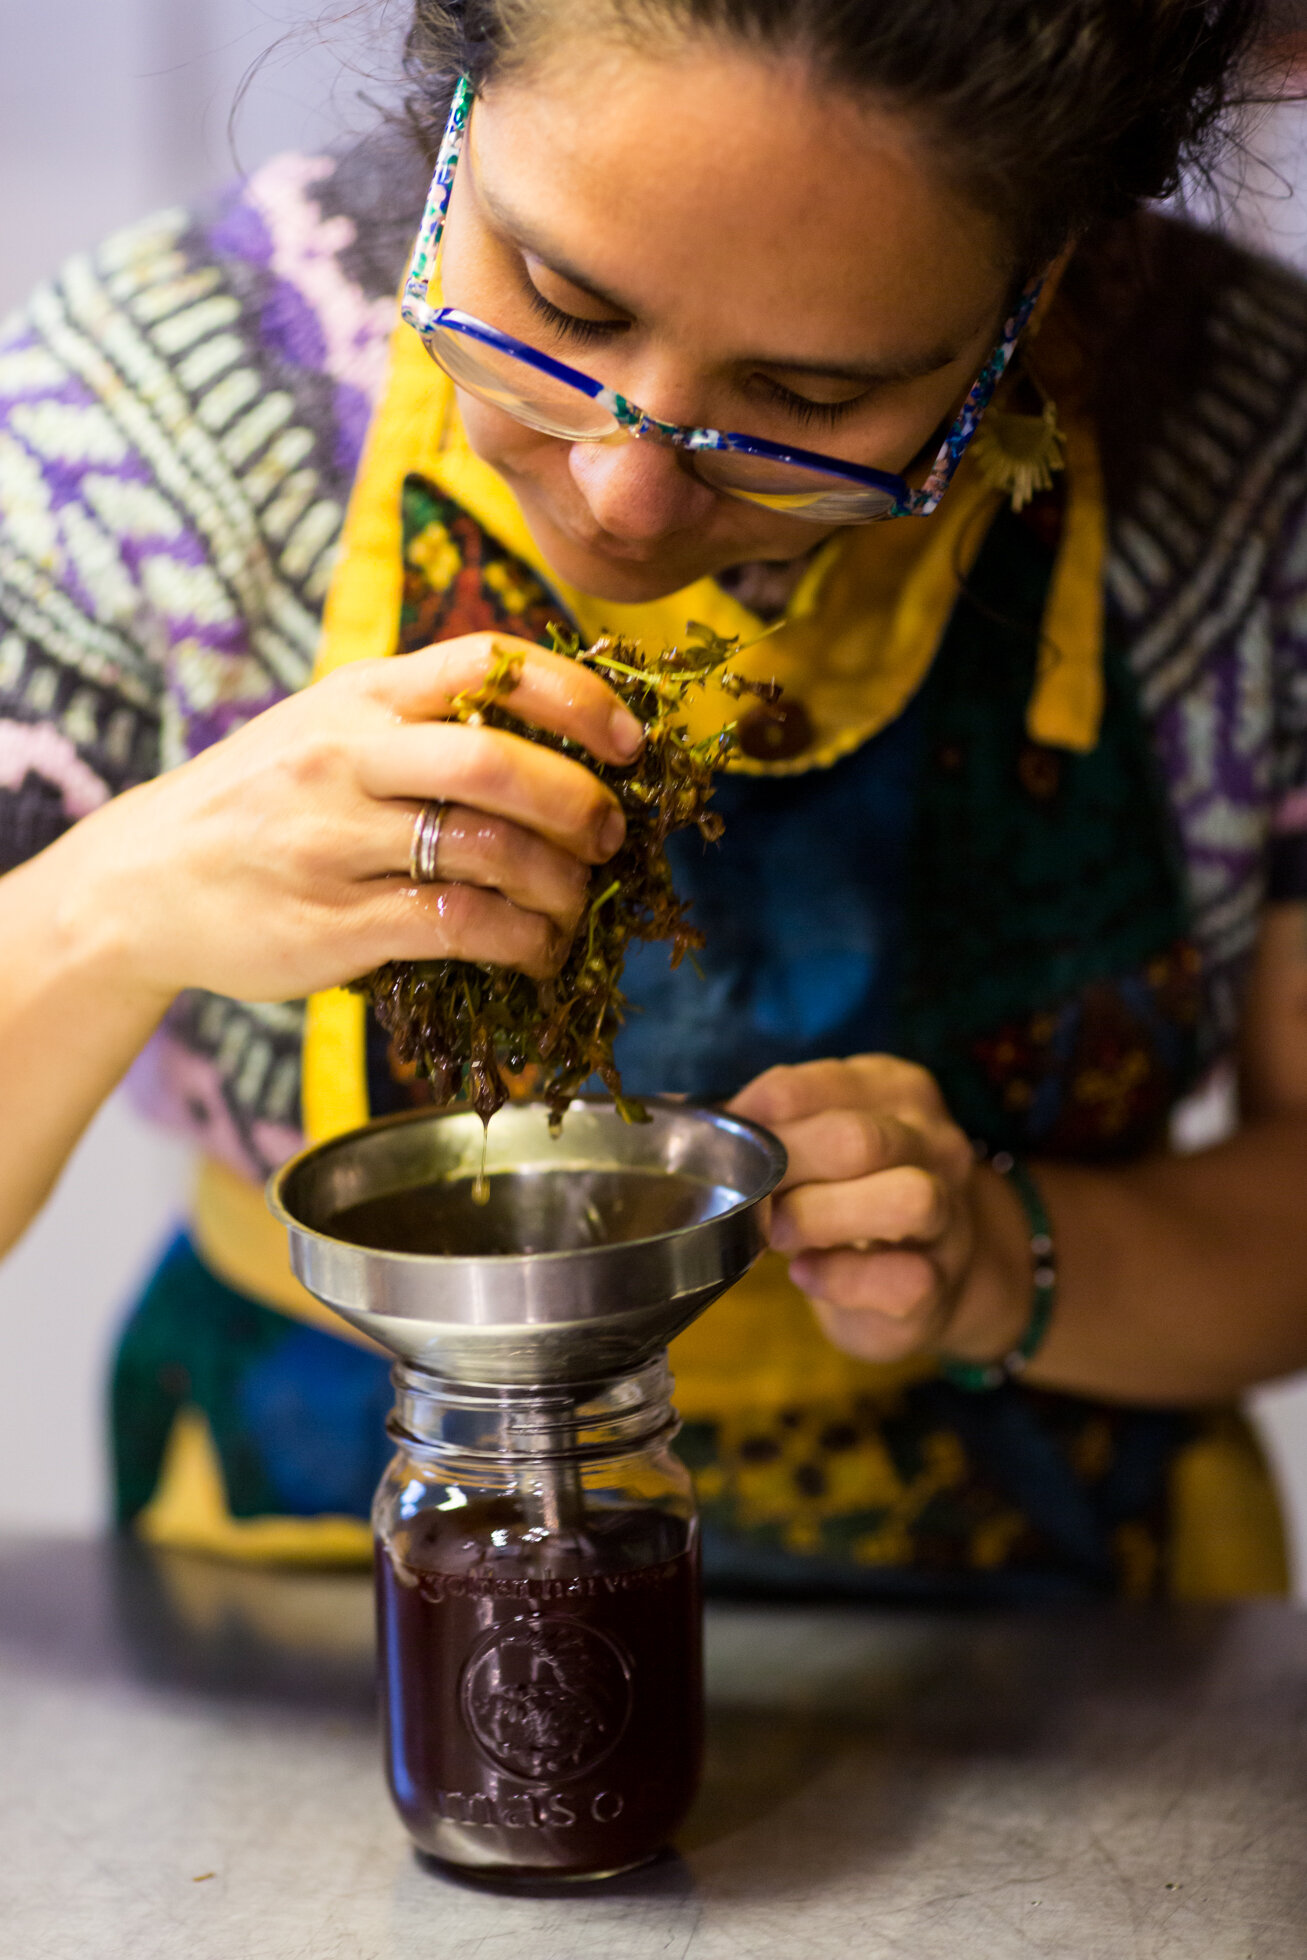 Celia Jimenez (Cucamanga) pours off red Saint John's Wort oil extract collected in the Canadian Laurentian forest.